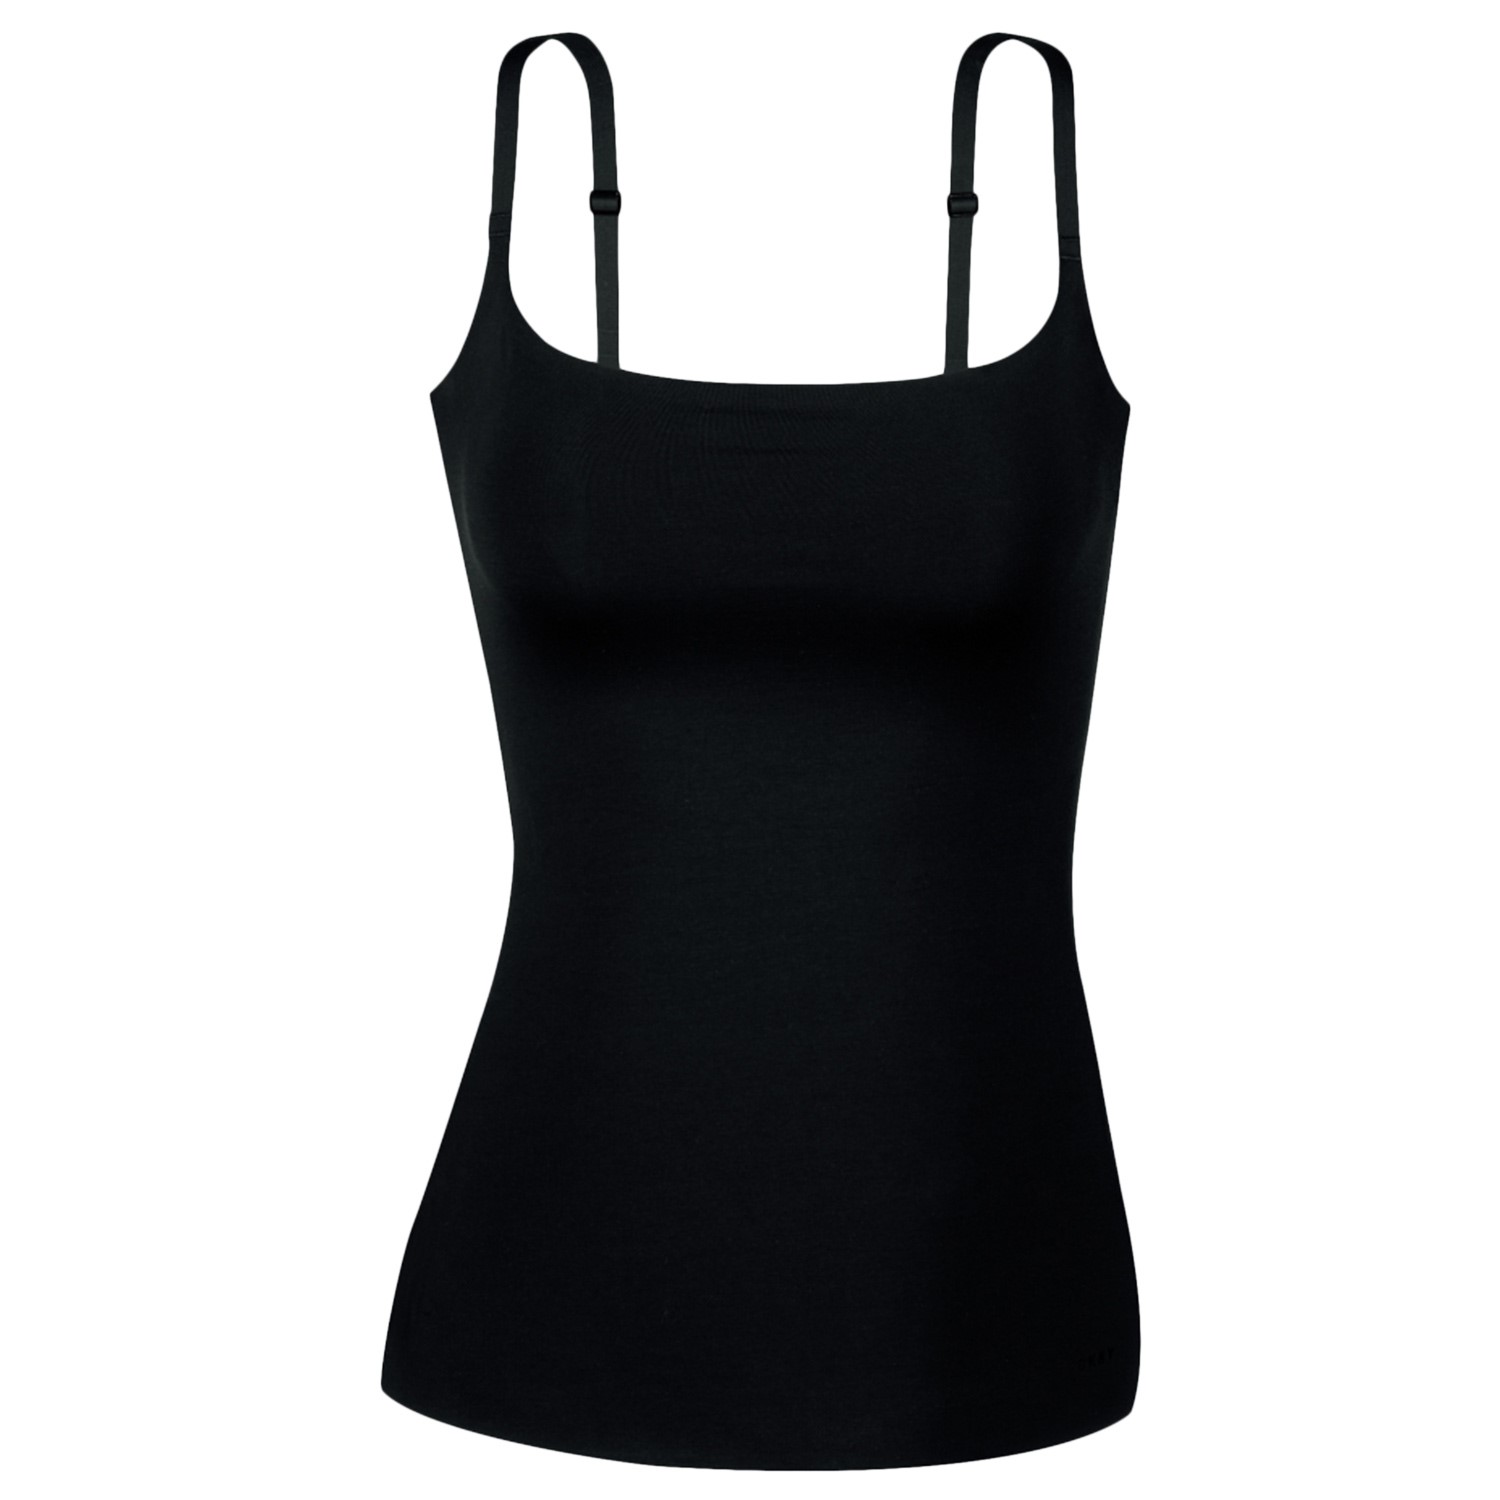 DKNY Classic Cotton Smoothing Cami 